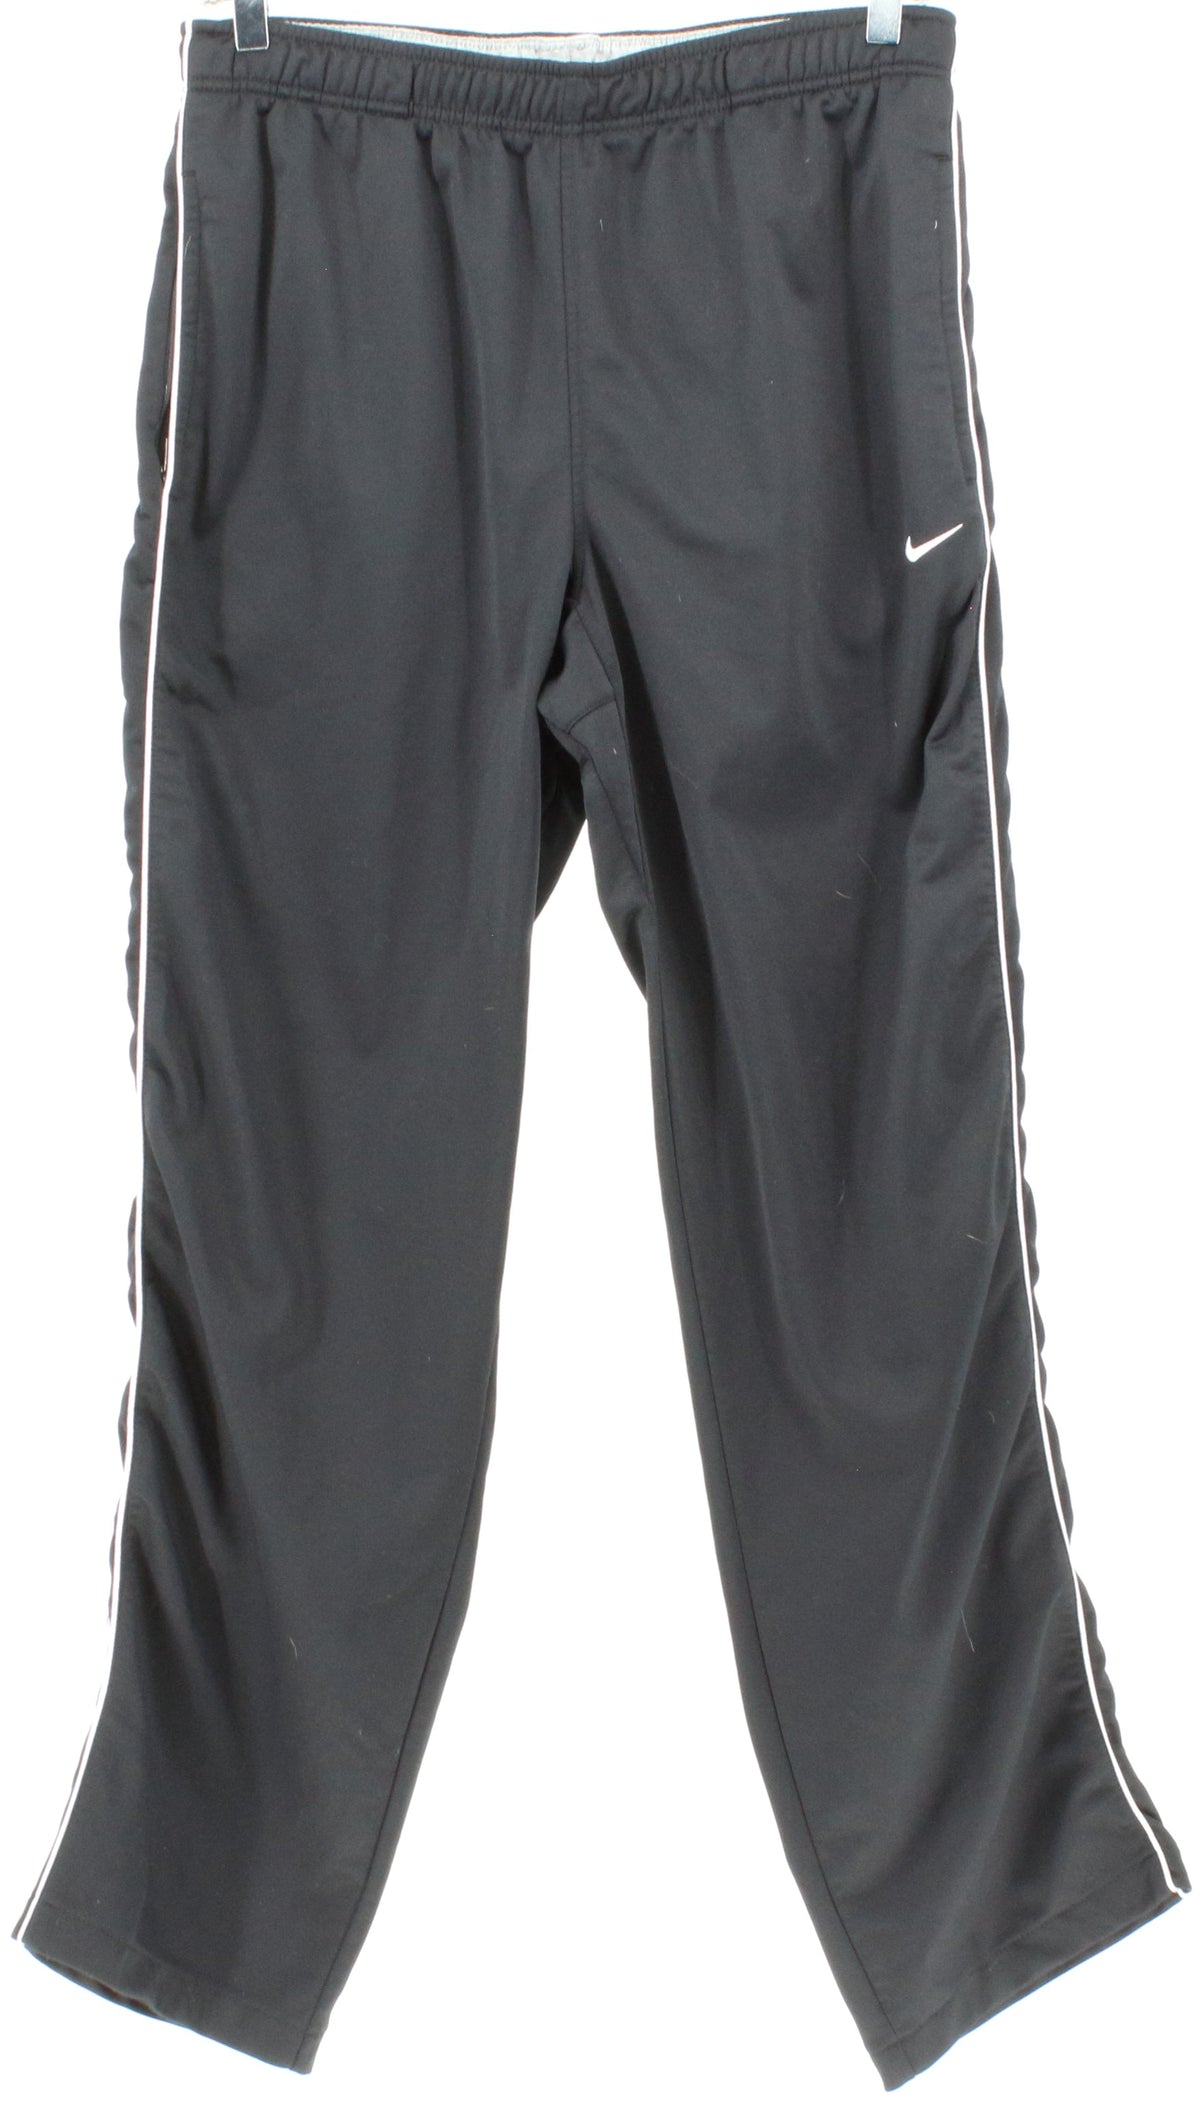 Nike The Athletic Dept. Black Men's Pants With White Piping Sides